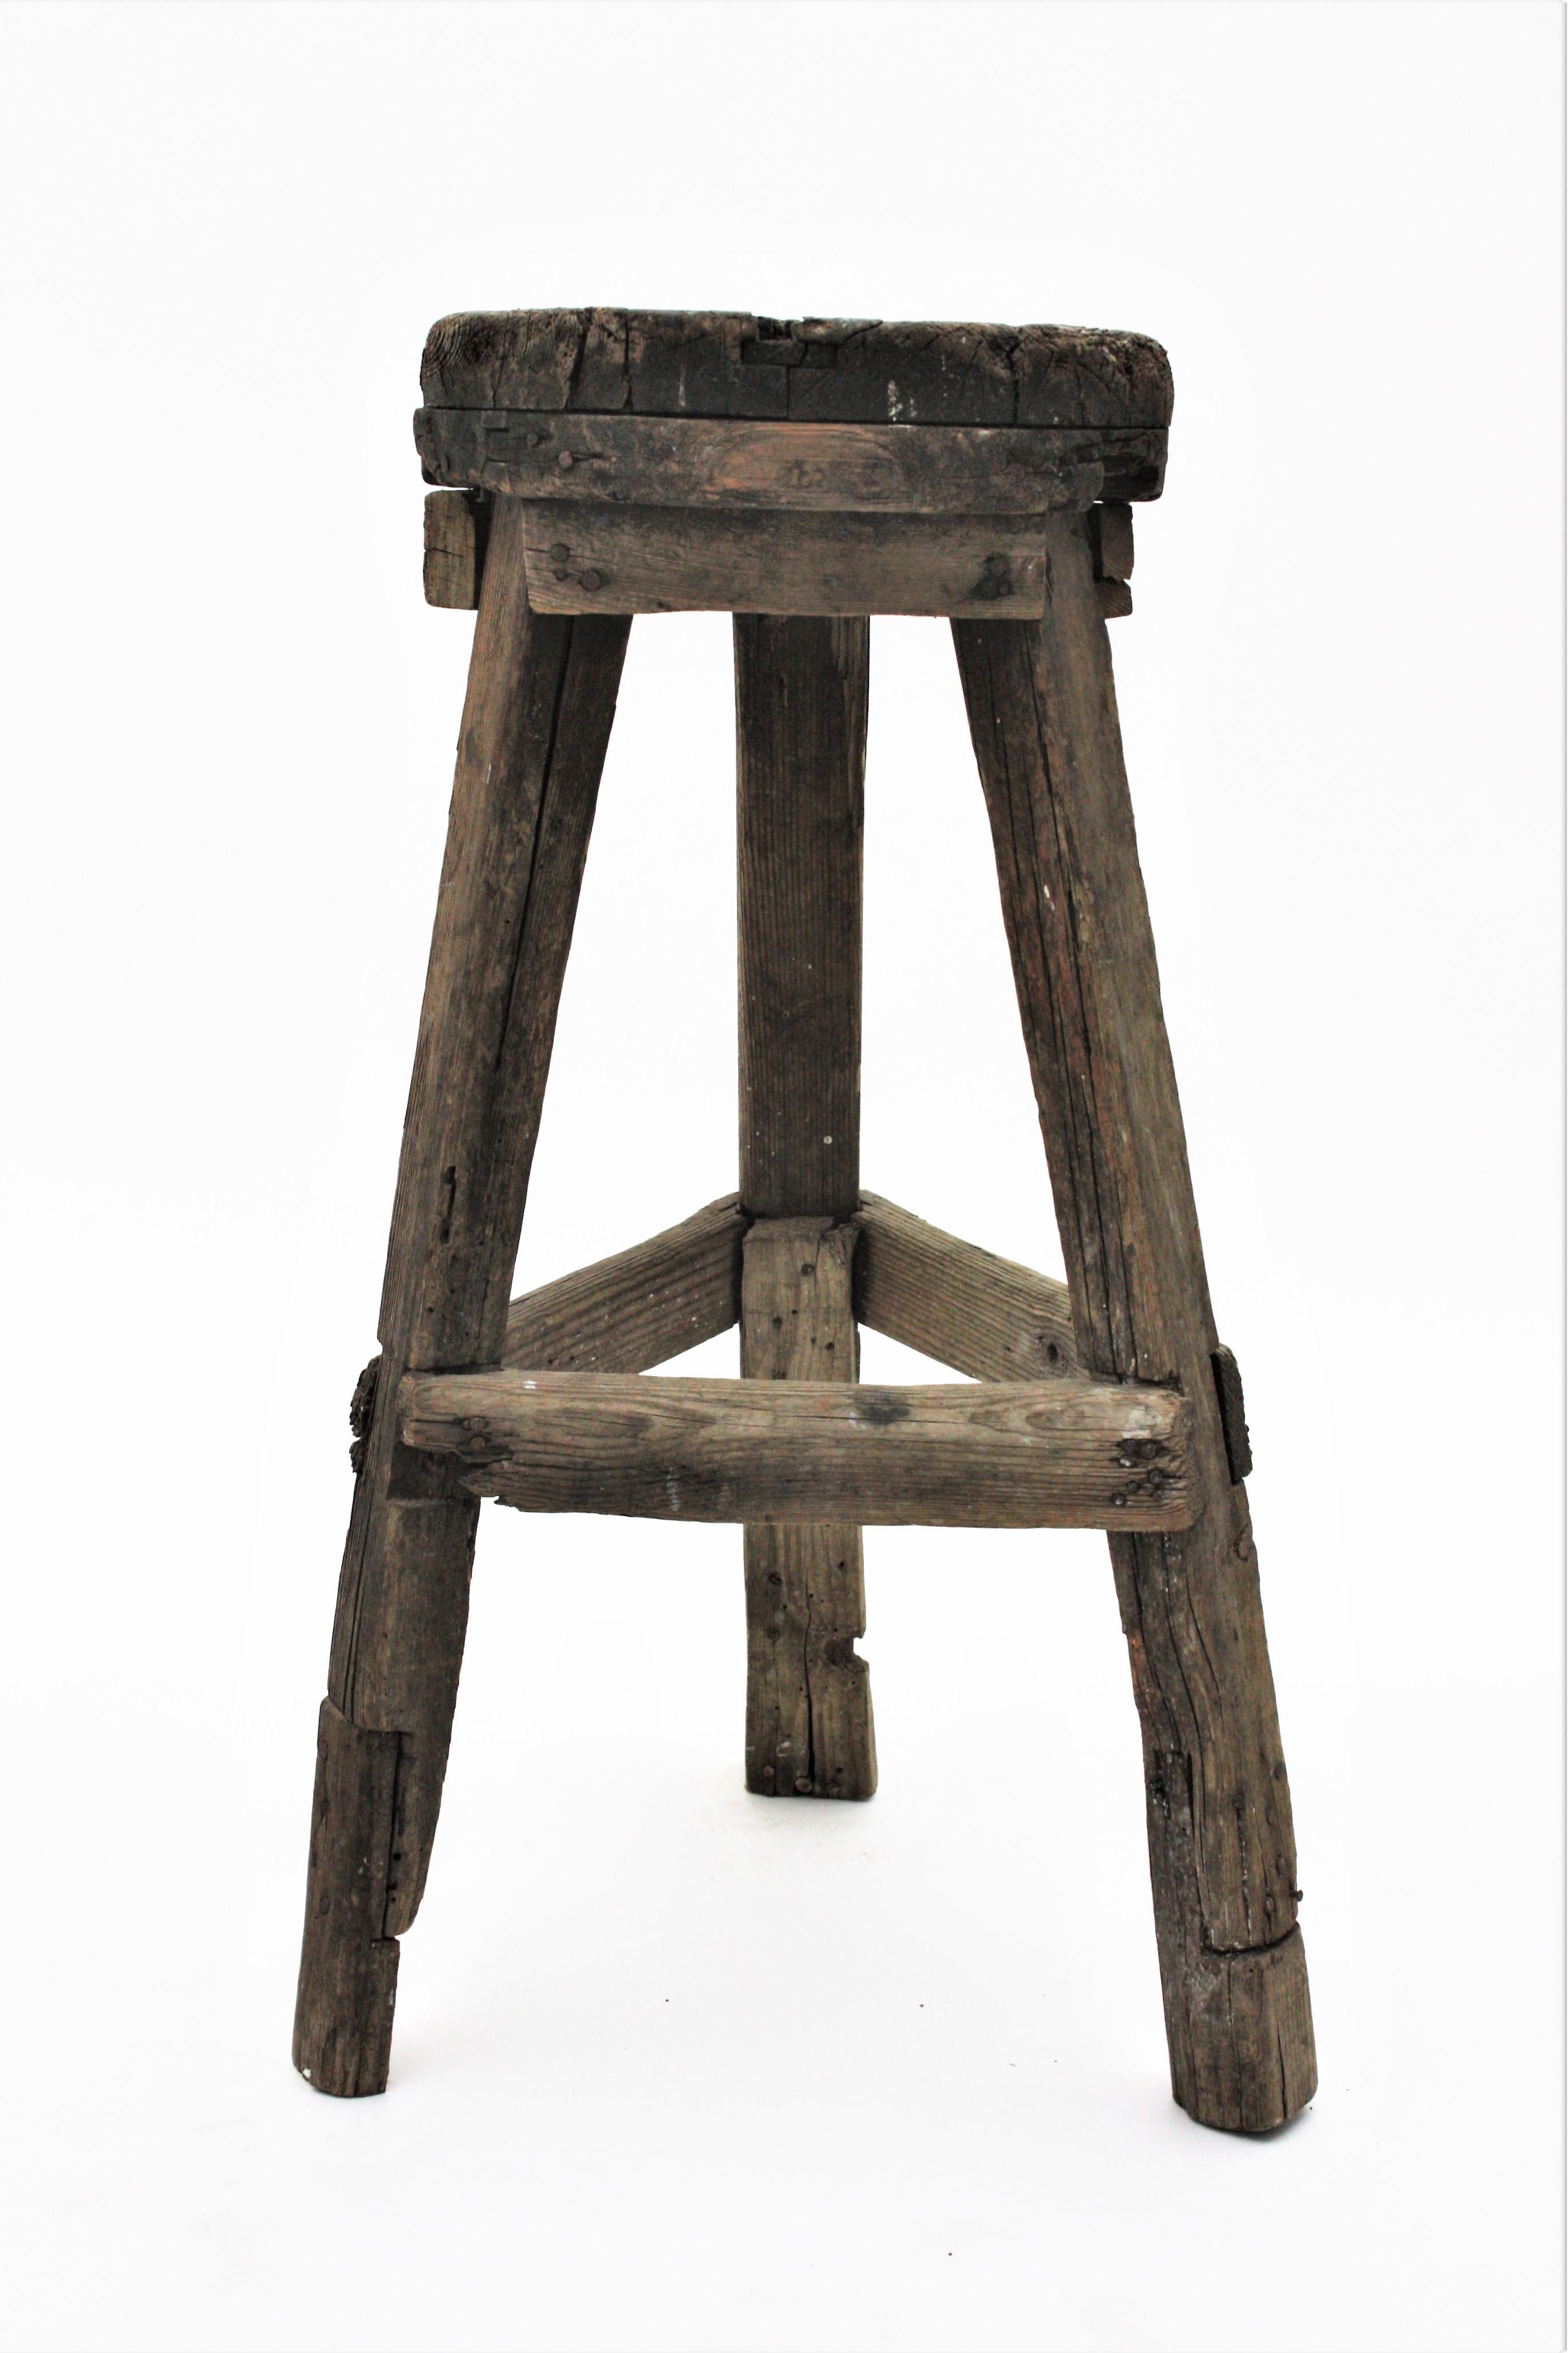 Rustic wooden high stool with a three-legged base and round seat. Spain, 1920s-1930s.
From the northern part of Spain this rustic stool has a primitive construction, great shape and character.
This traditional farm or workshop rustic stool has a